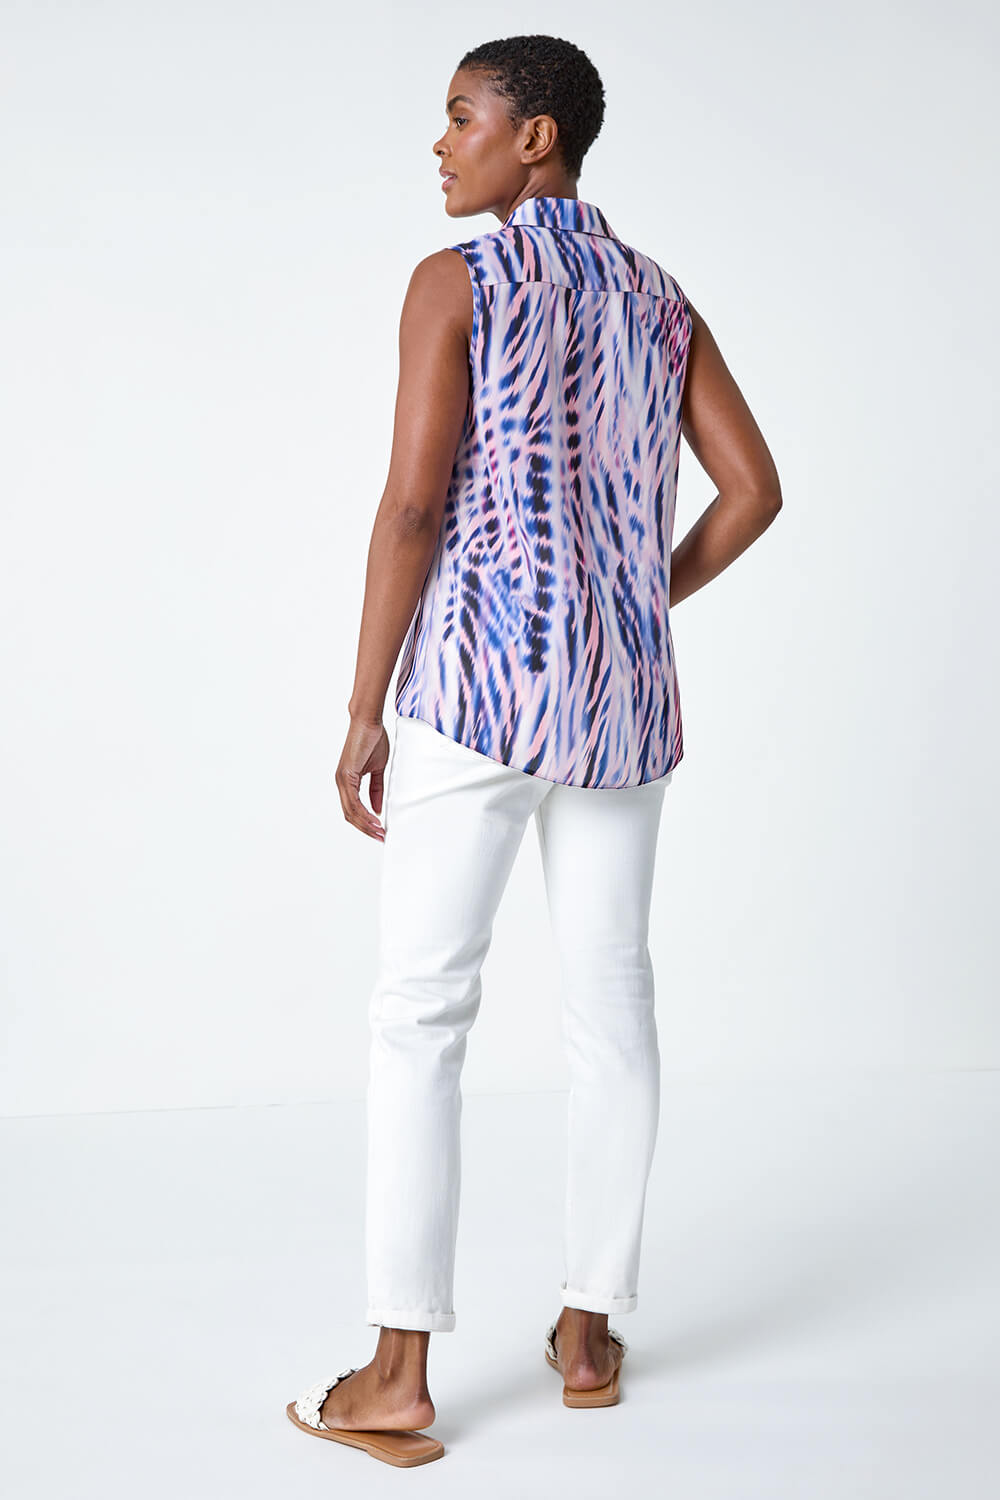 PINK Sleeveless Abstract Print Blouse, Image 3 of 5